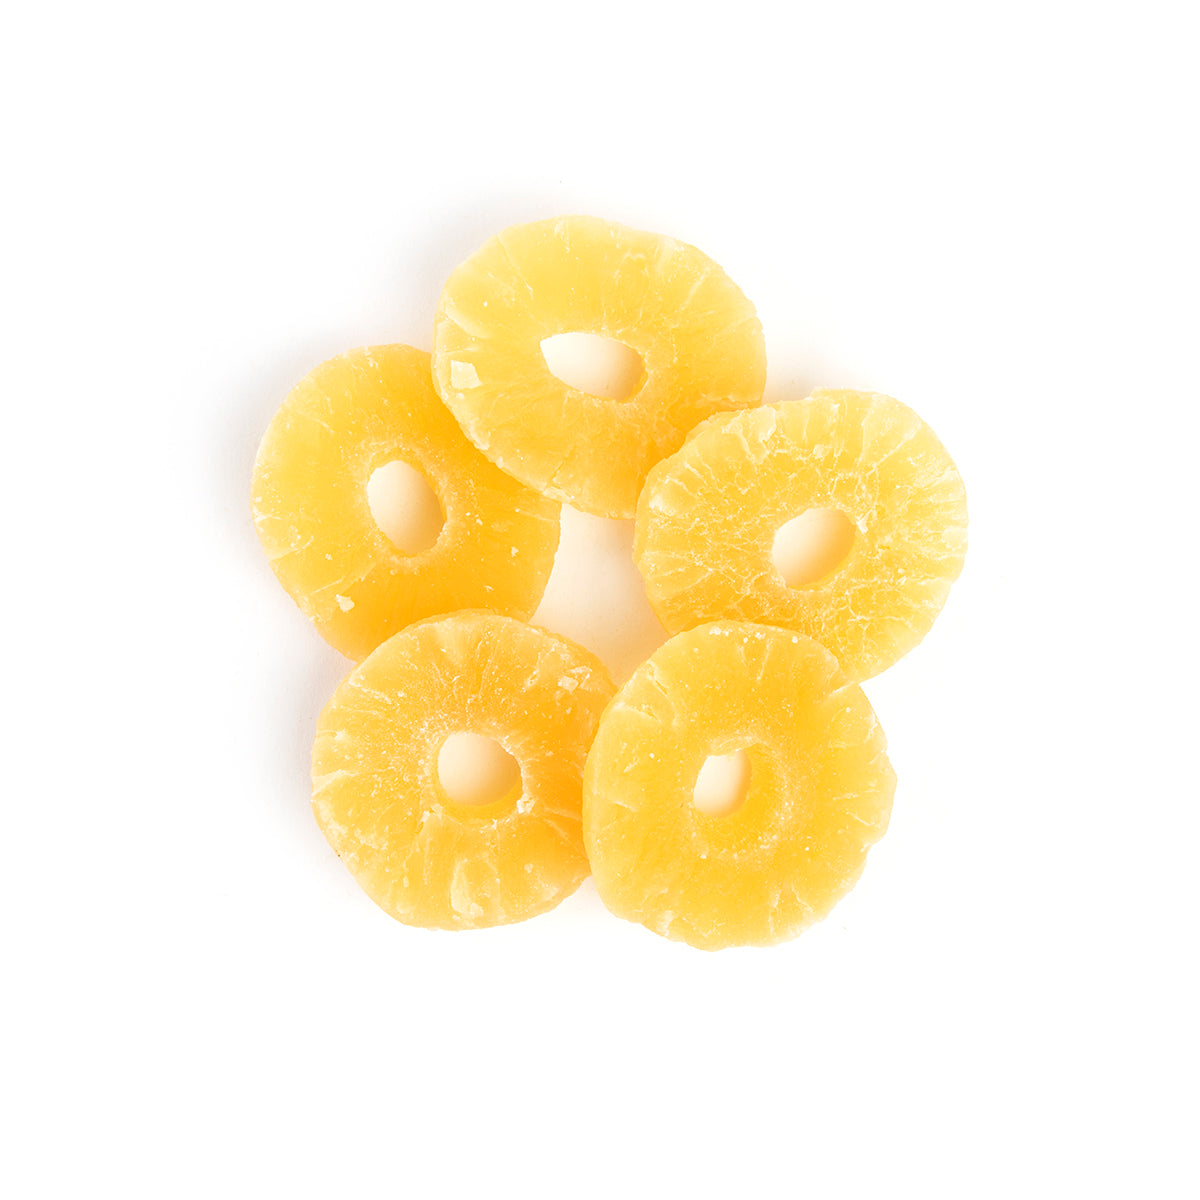 Bazzini Dried Pineapple Rings